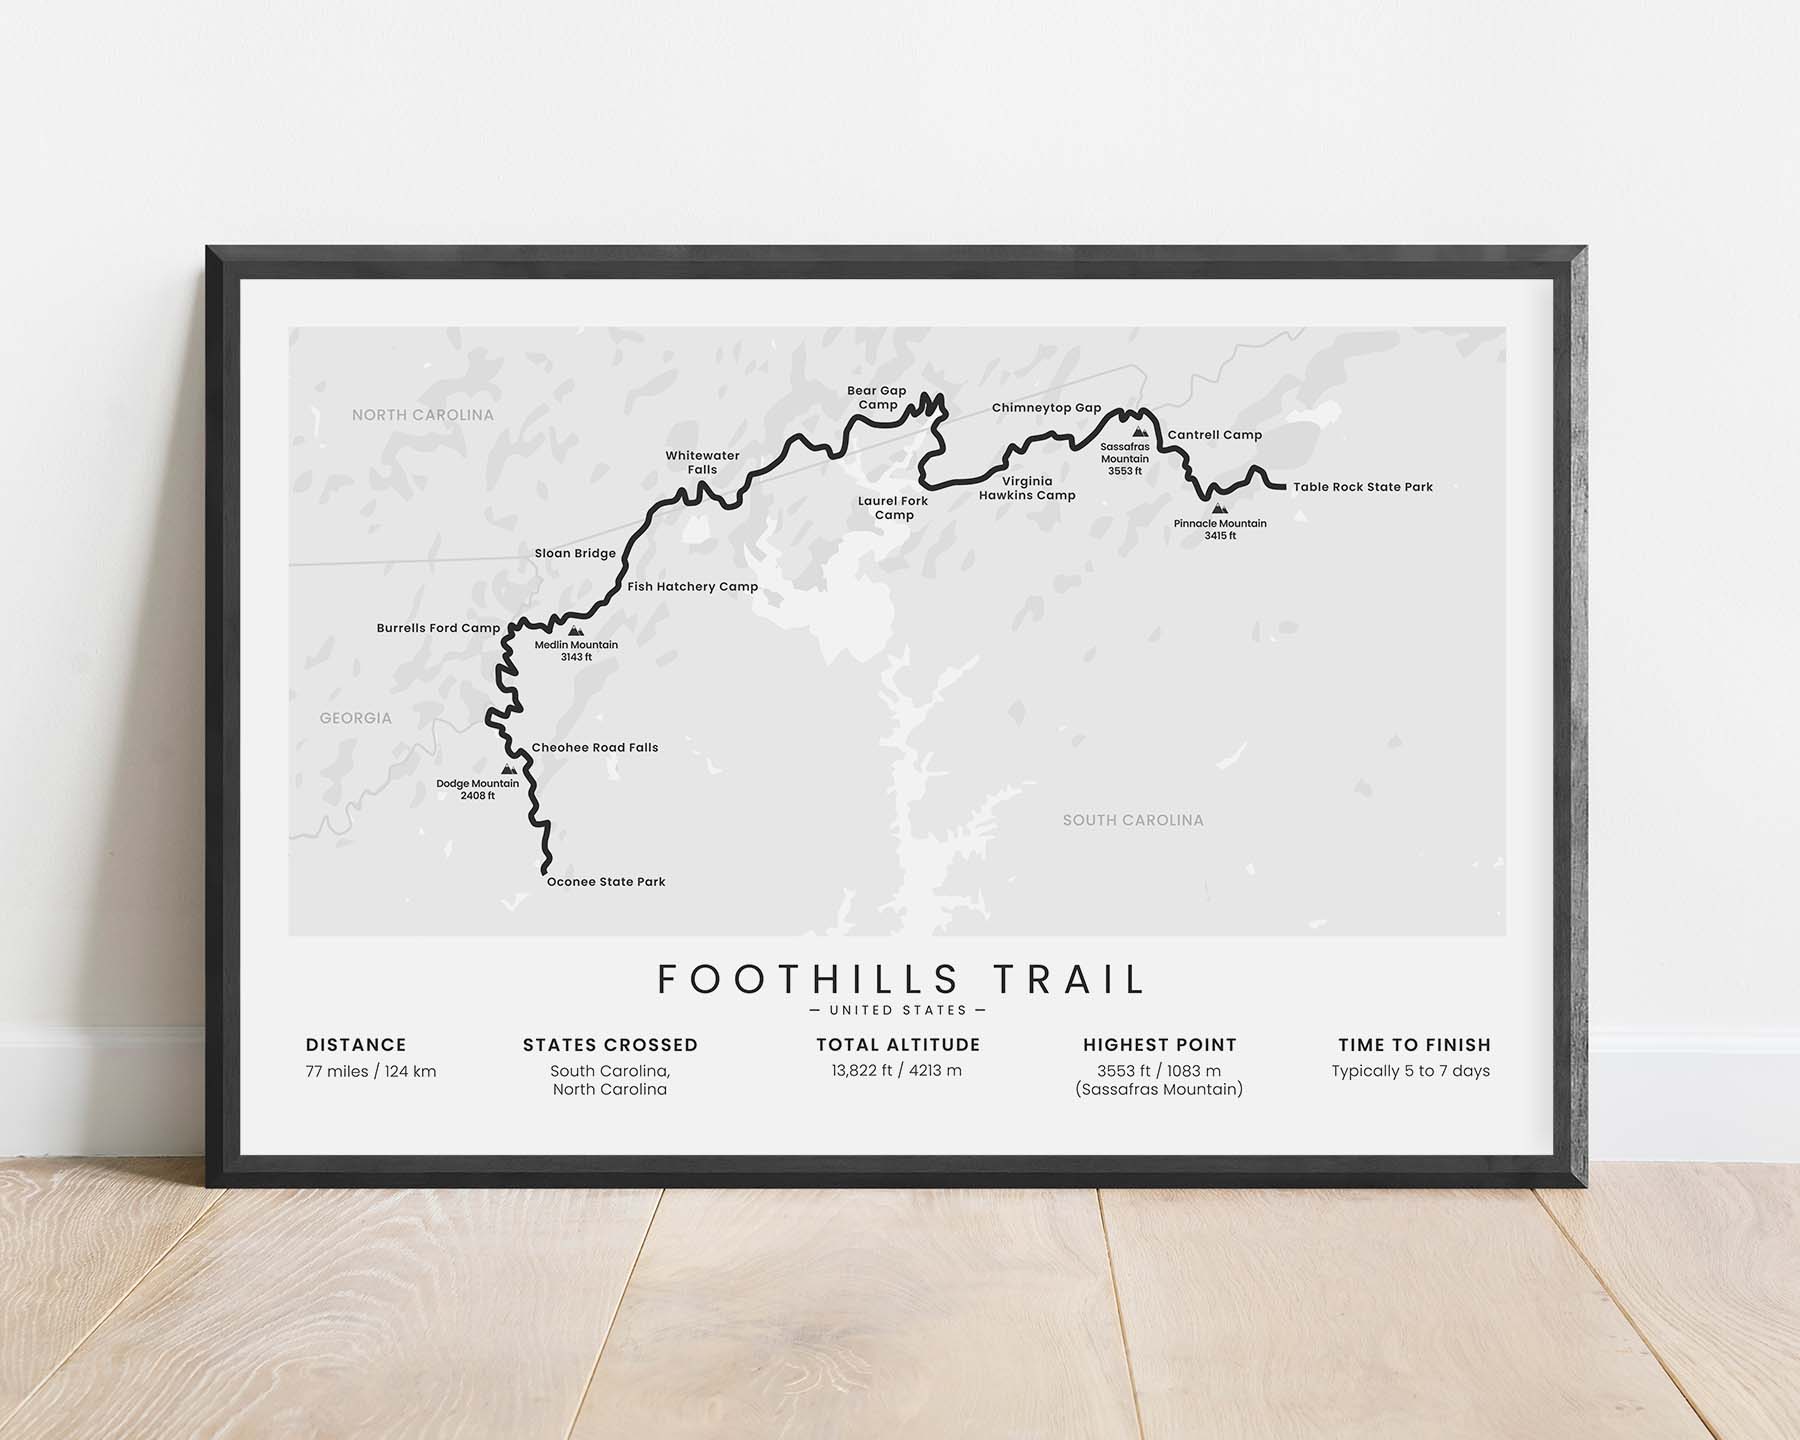 Foothills Trail (North Carolina) Hike Poster with White Background in Minimal Room Decor